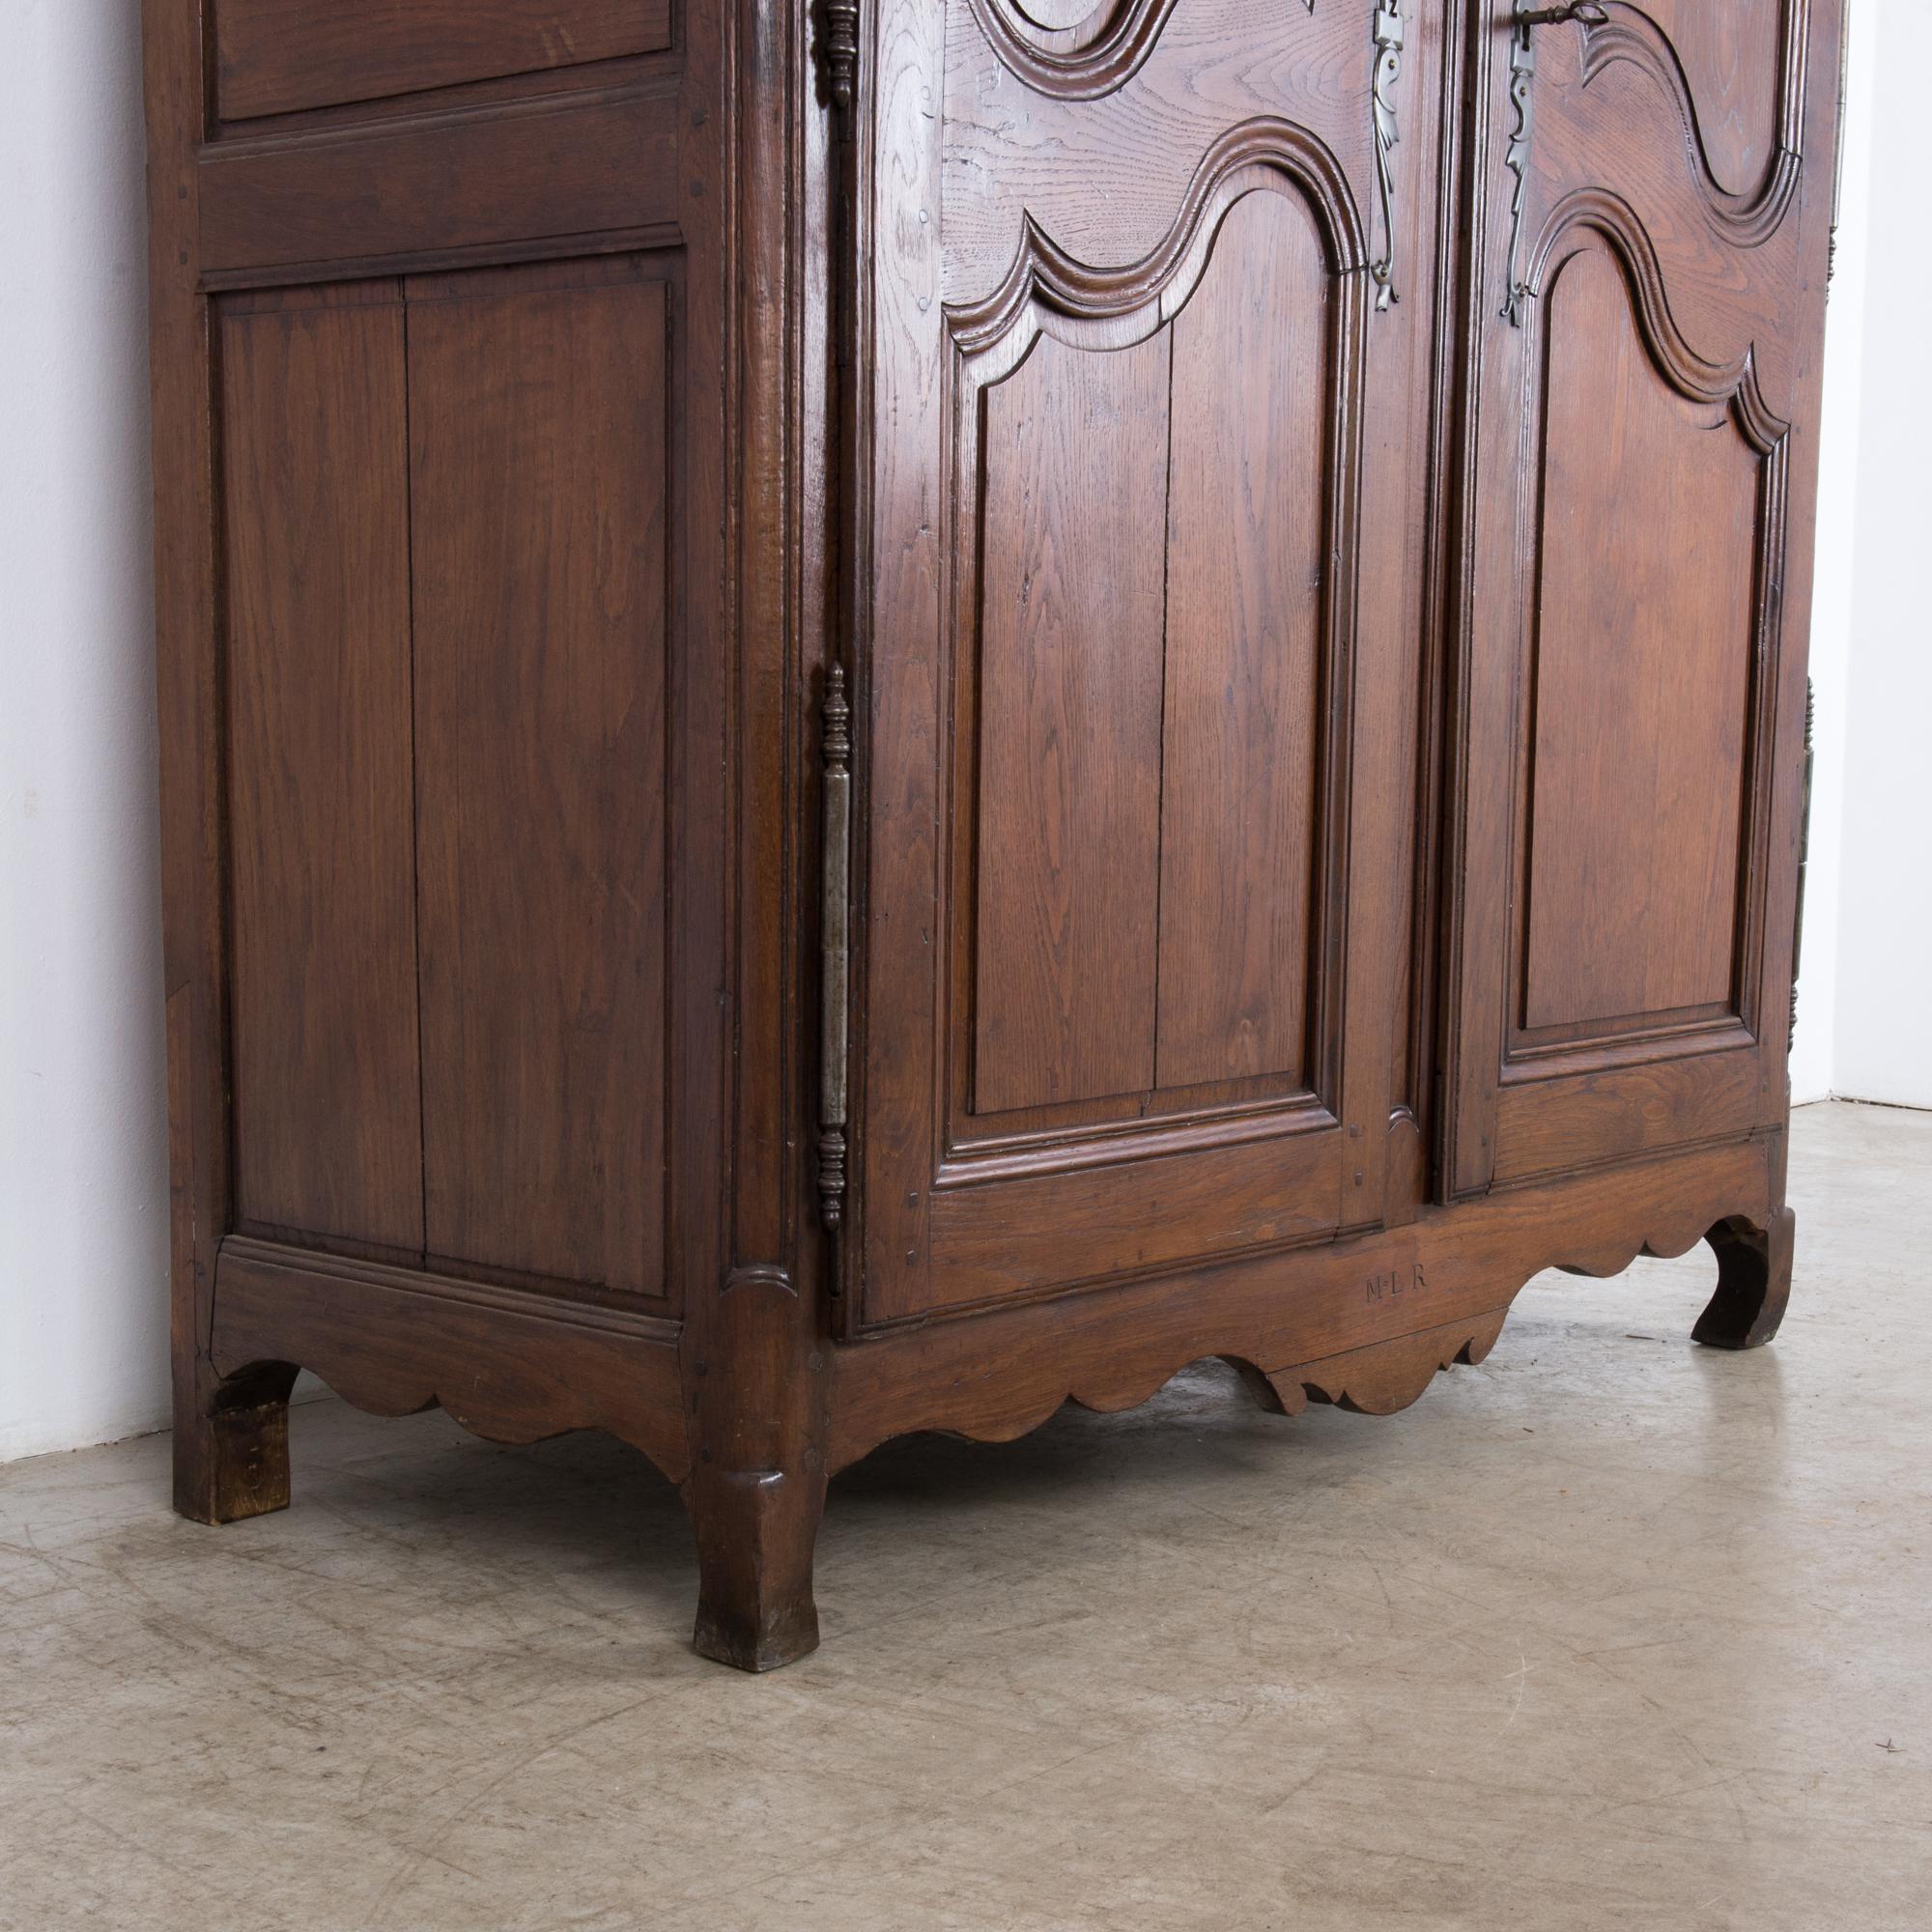 Turn of the Century Wooden Armoire with Original Patina 3